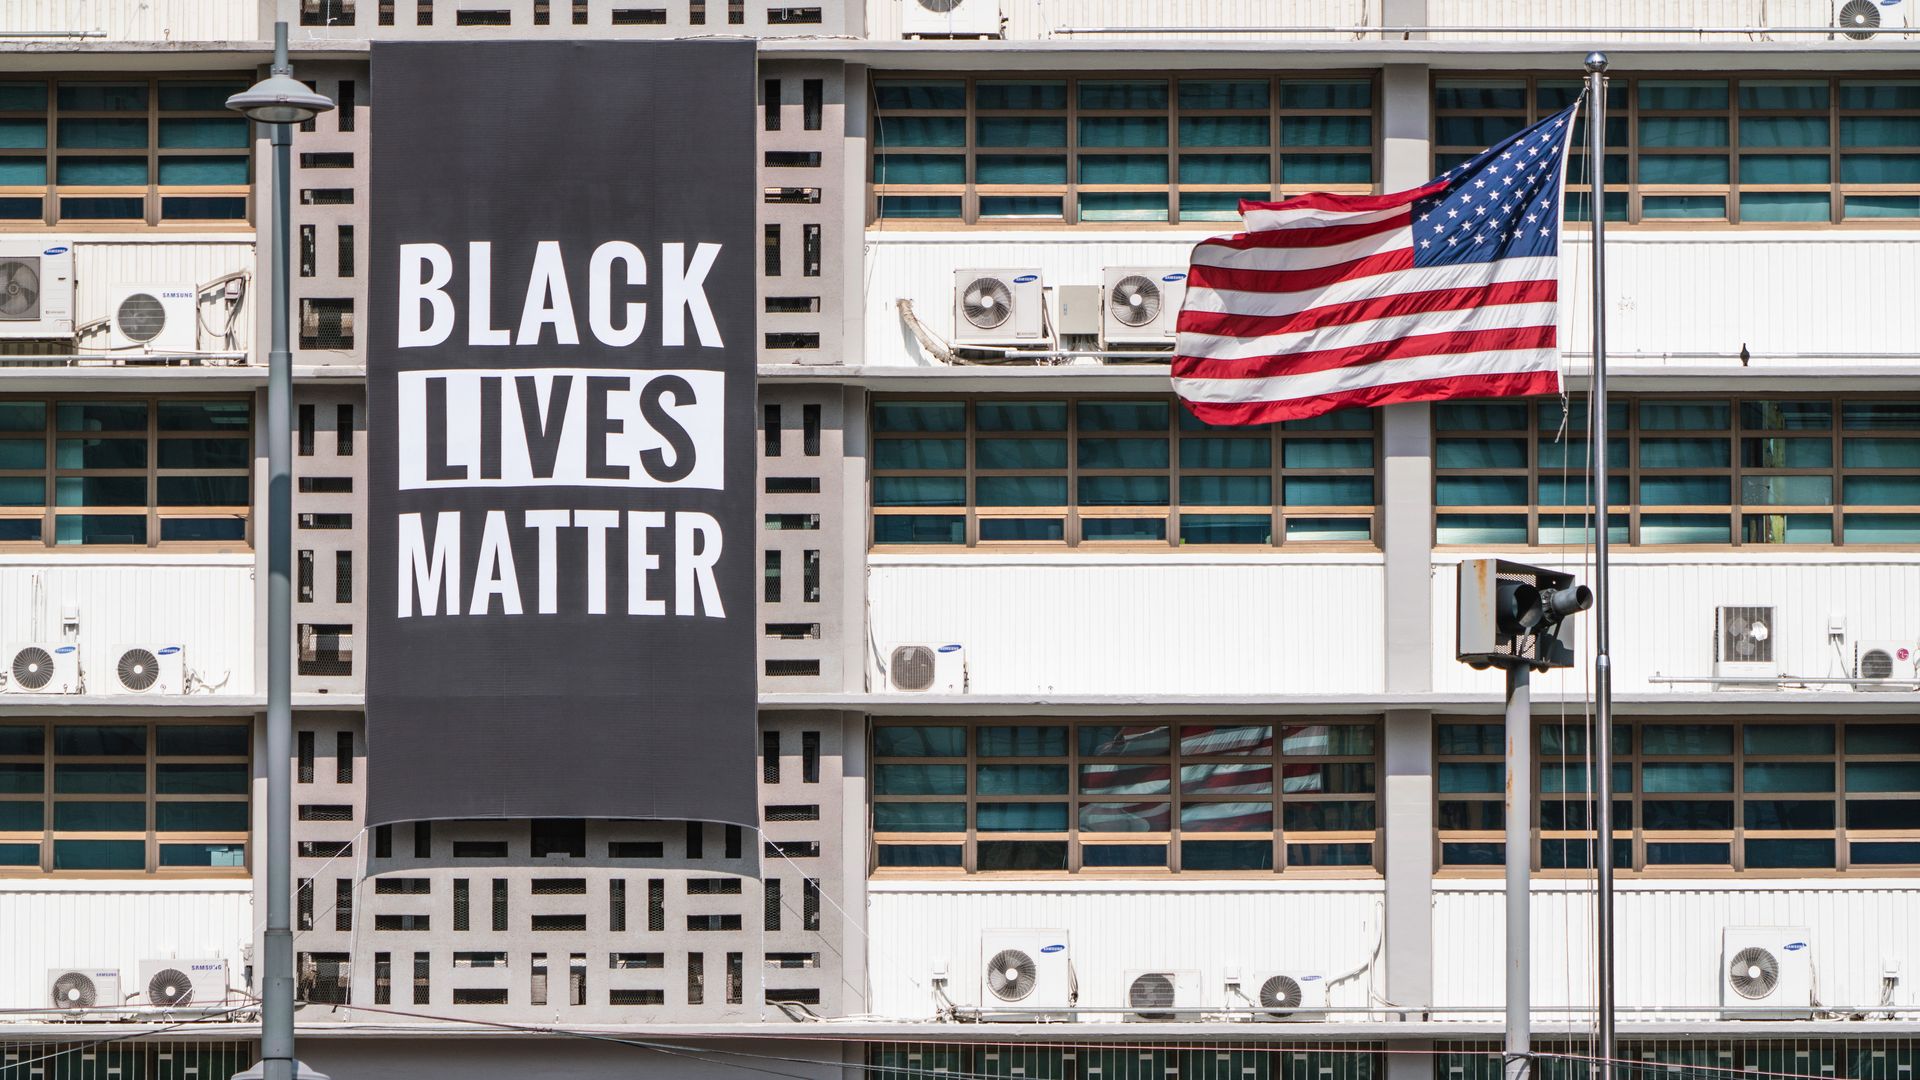 The American flag next to a "Black Lives Matter" sign.